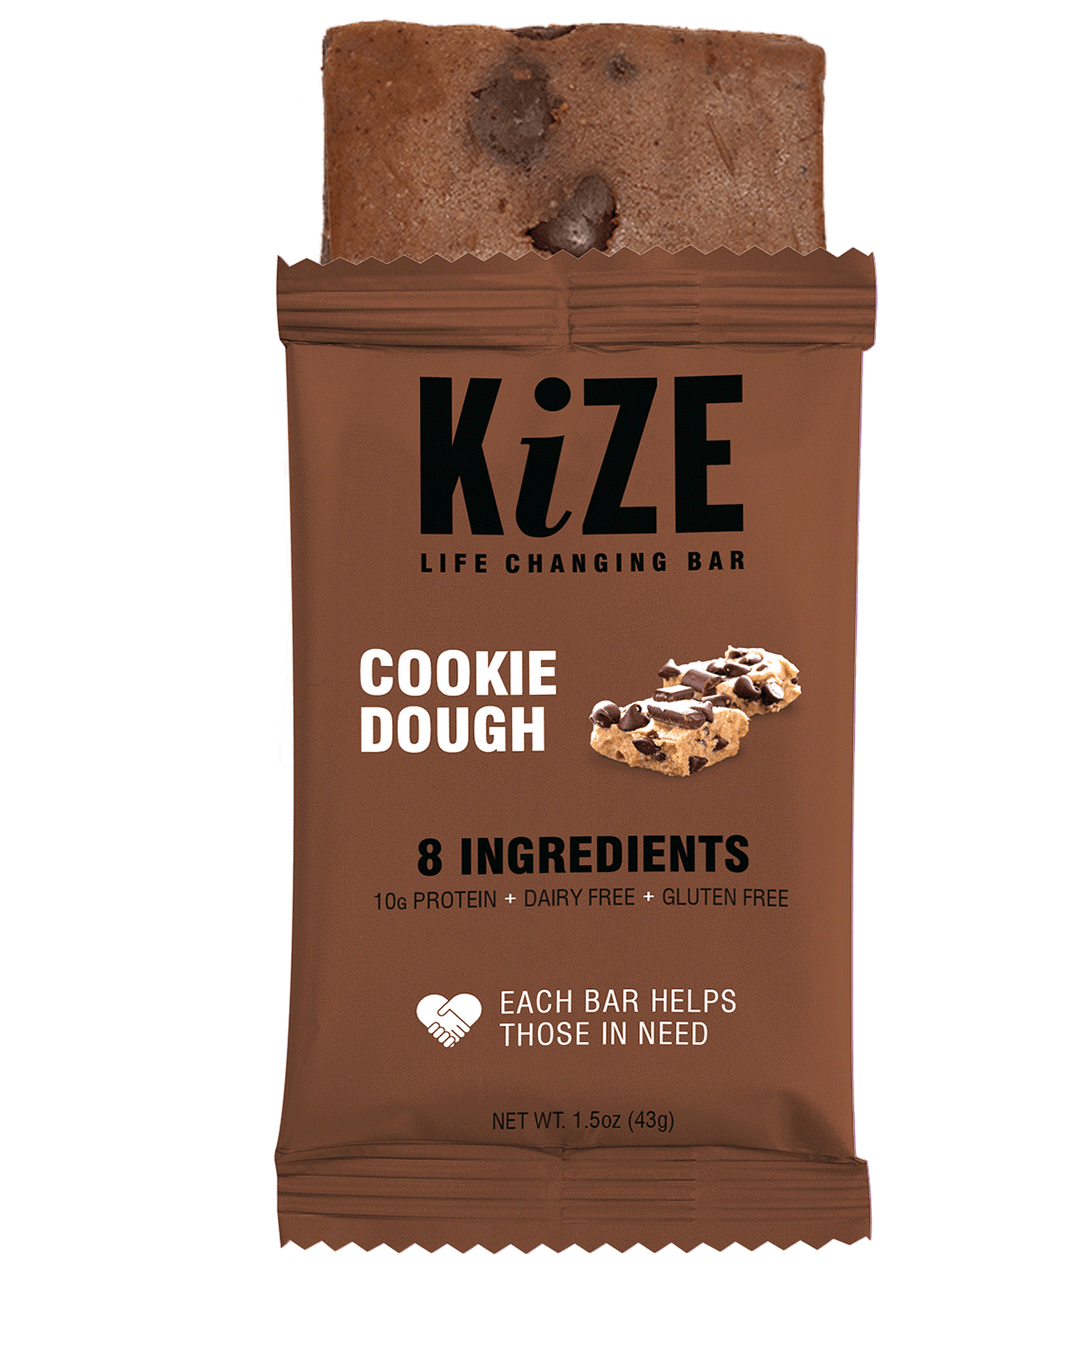 Kize cookie dough protein bar dairy free gluten free packaging.